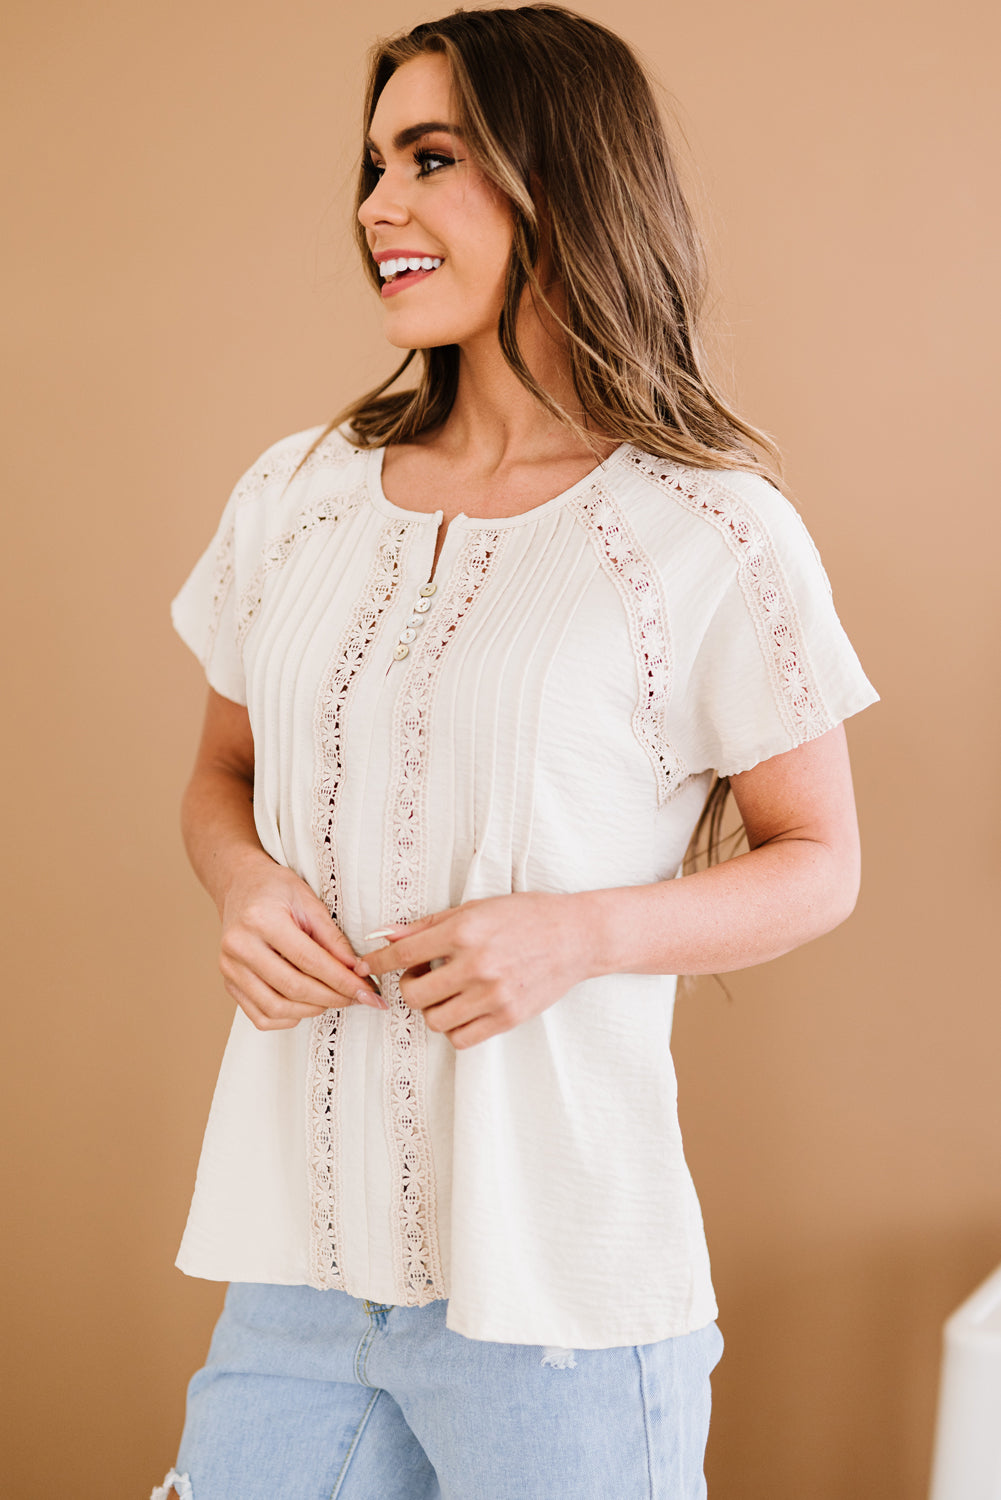 LADIES--Ready for Spring? Beautiful top, Crochet Eyelet Buttoned Short Sleeves